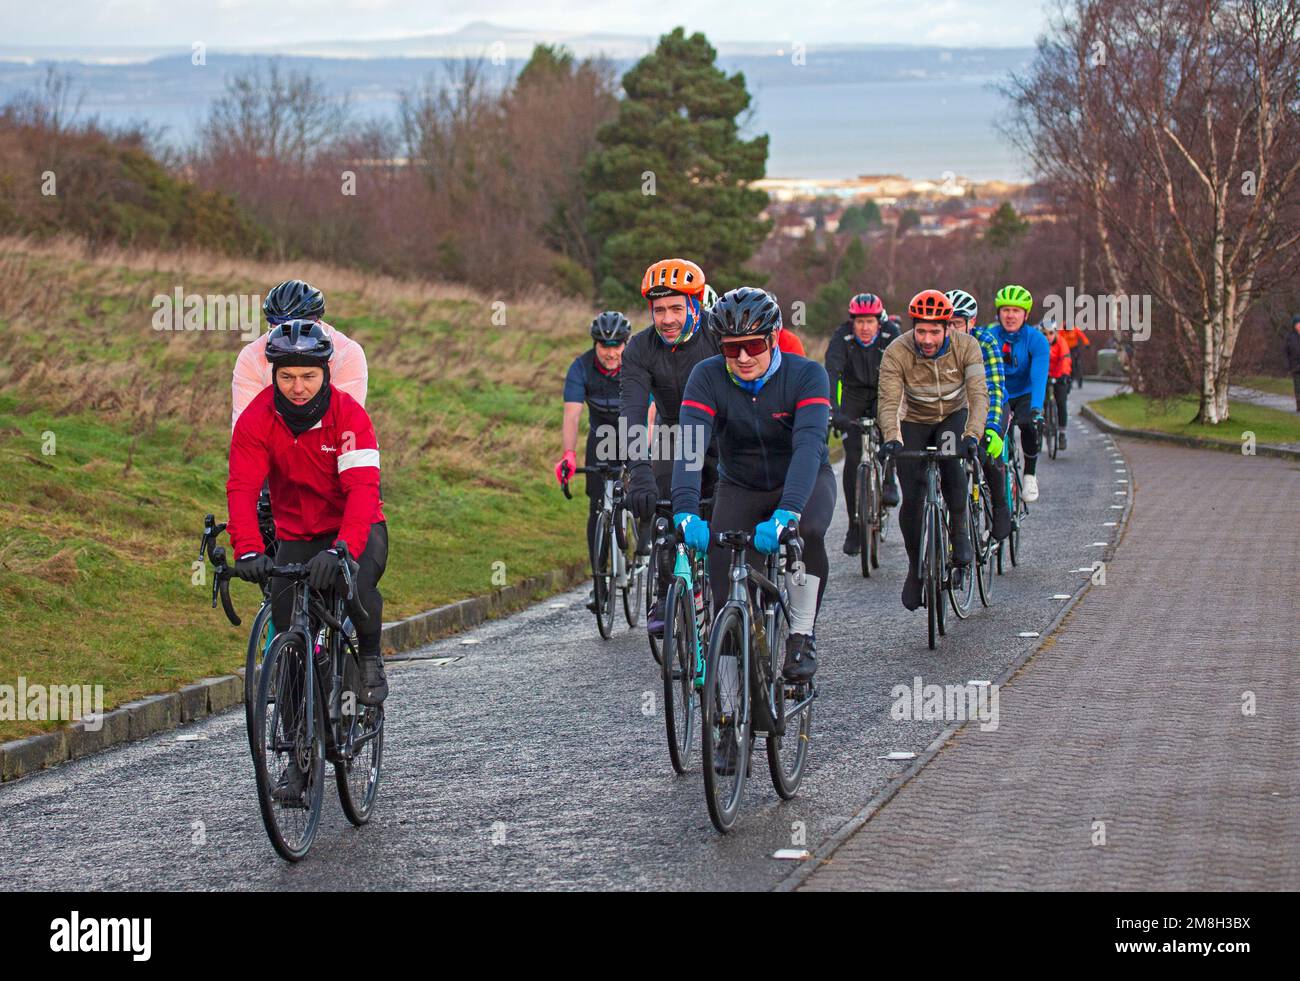 Mark Beaumont and friends at Arthurs Seat, Holyrood Park, Edinburgh, Scotland, for 10.30 this morning 14 January 2023 for some Doddie Aid laps, enduring rain, hail and a little sunshine at 4 degrees centigrade. Doddie Aid is a virtual mass-participation exercise event founded by former Scotland captain, Rob Wainwright, that lasts for 6 weeks from 1 January 2023.  In memory of the late Doddie Weir, raising funds for My Name'5 Doddie Foundation a charity committed to raising funds to fight Motor Neuron Disease. Credit: ArchWhite/alamy live news. Stock Photo